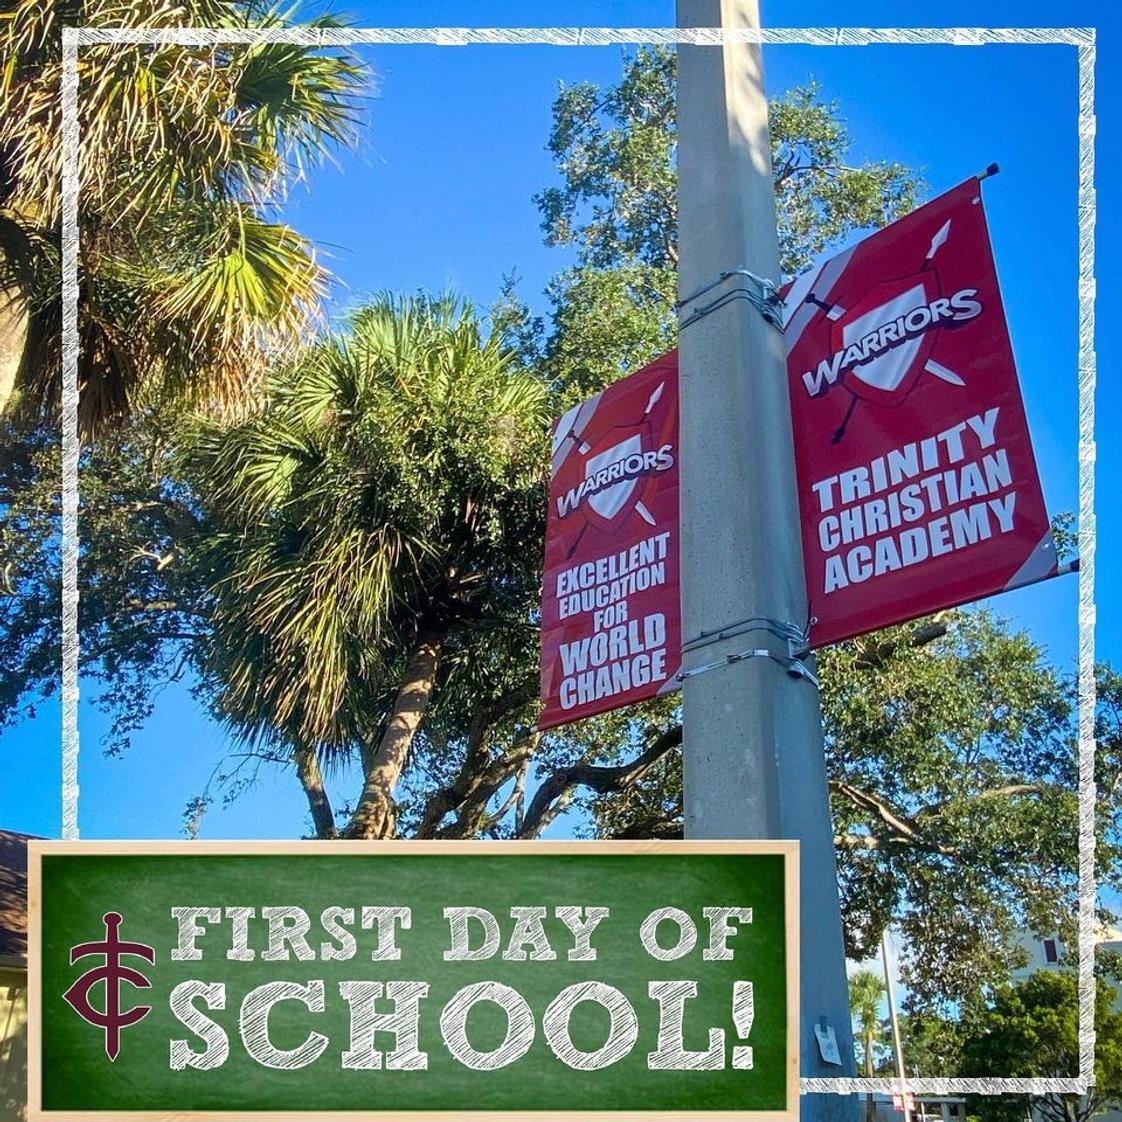 Trinity Christian Academy Photo #1 - Welcome back, Warriors! We are so excited to be back on campus! To schedule a tour call 561-967-1900 or email gee.cindy@tcamail.org. We look forward to partnering with you!